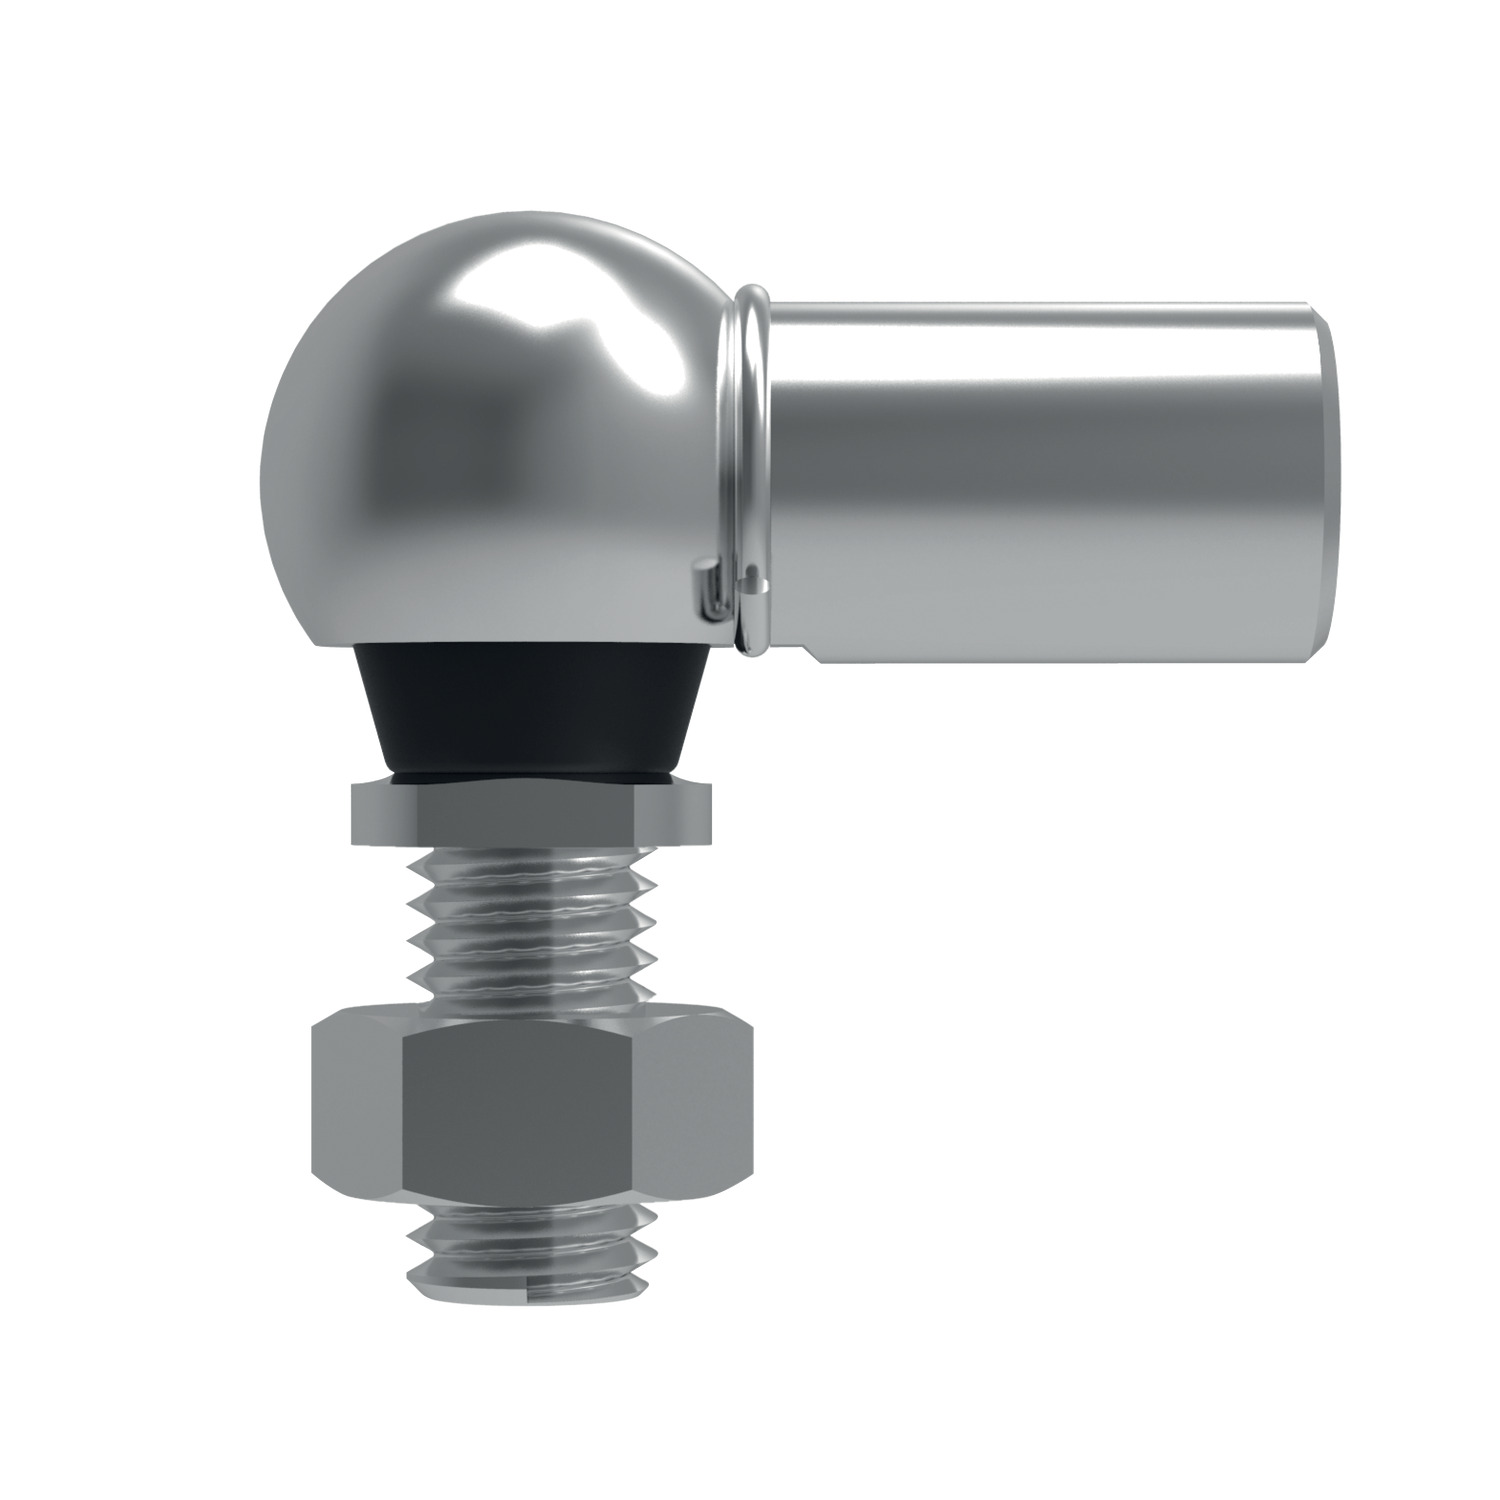 Stainless Ball and Socket Joint Stainless steel joint with a neoprene sealing cap (corrosion resistant A2 grade to AISI 303), supplied with hexagon nut.